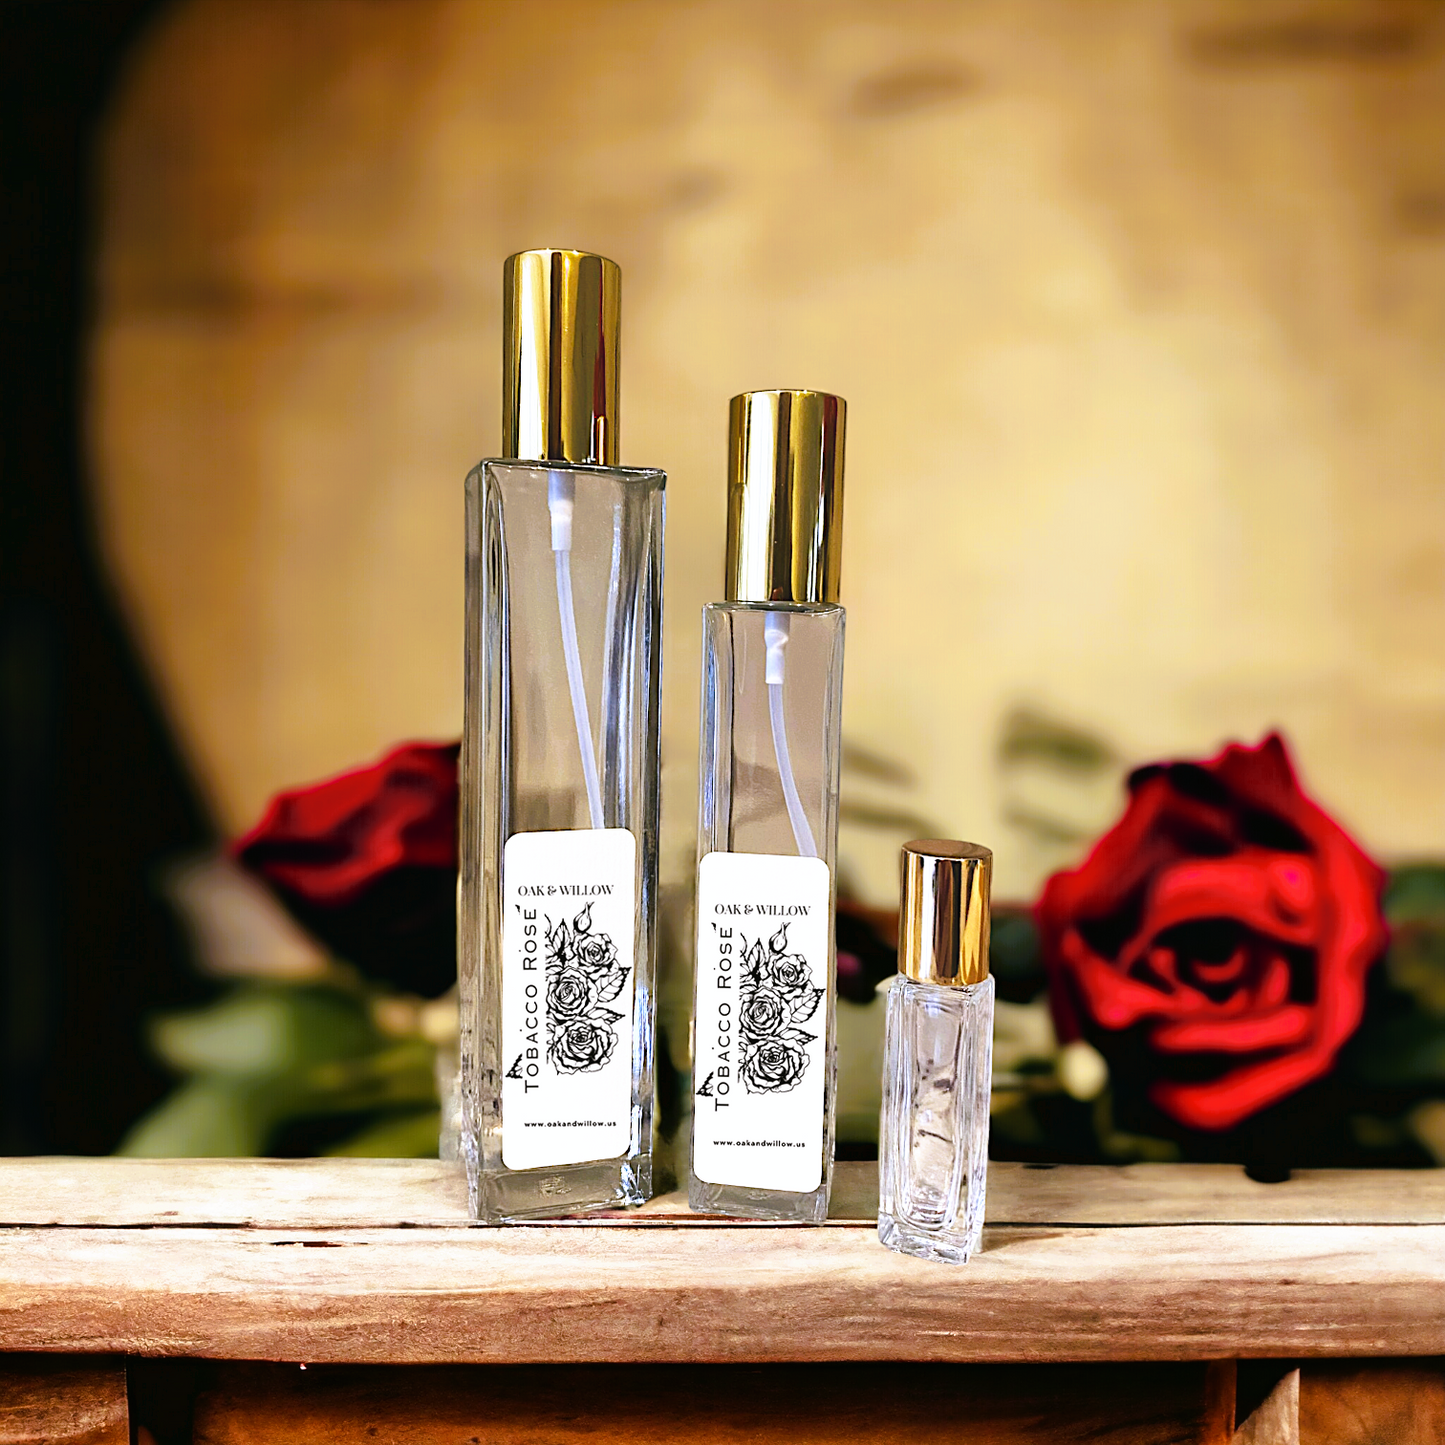 Tobacco Rose Fragrance - Rose petals, Tobacco Leaves, and Vanilla.